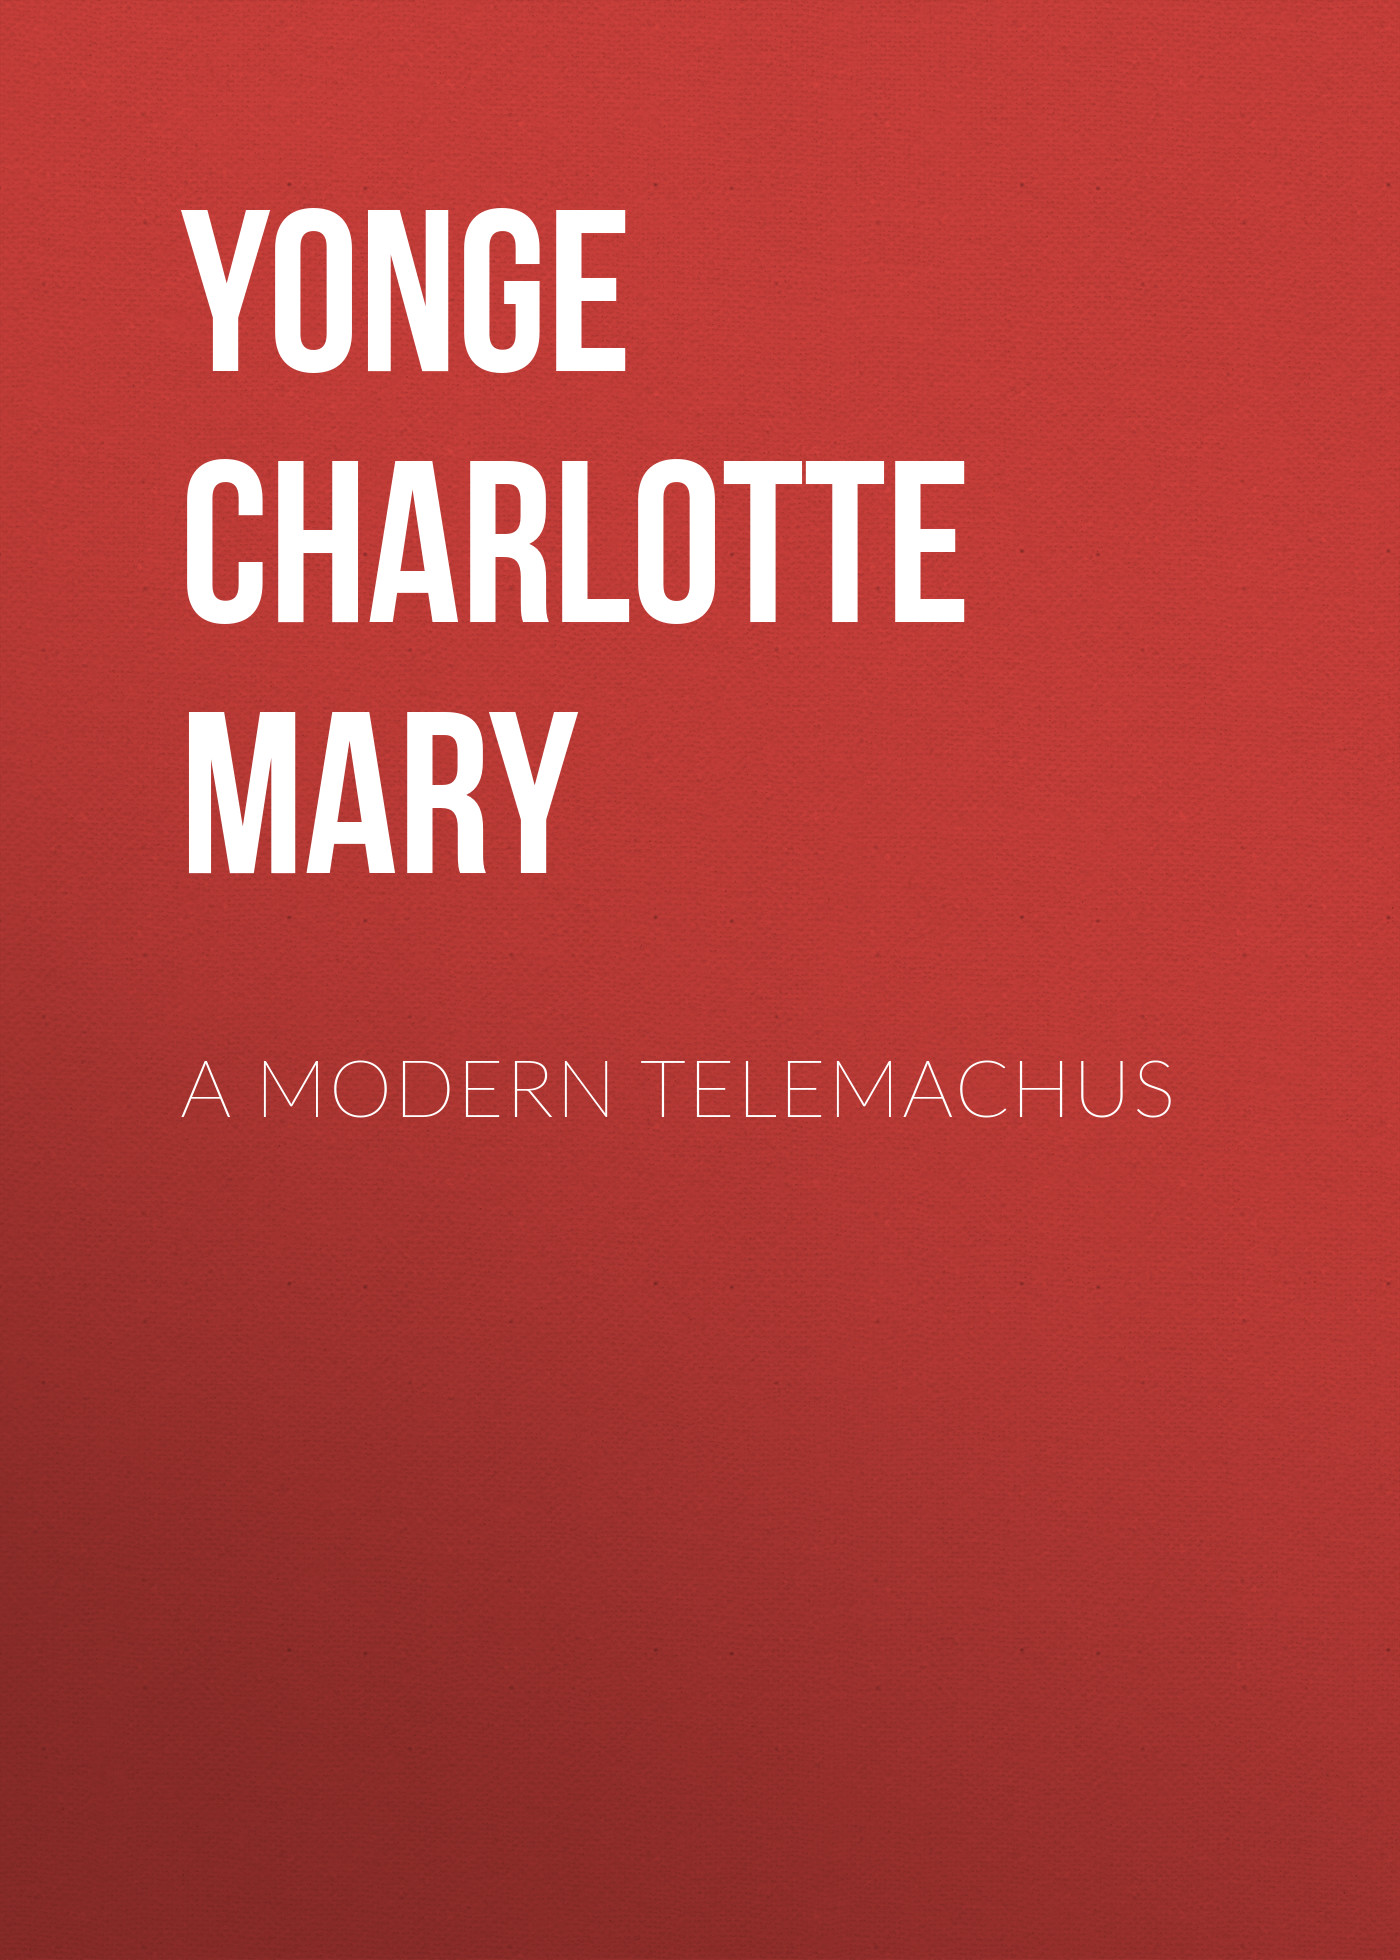 Yonge Charlotte Mary A Modern Telemachus